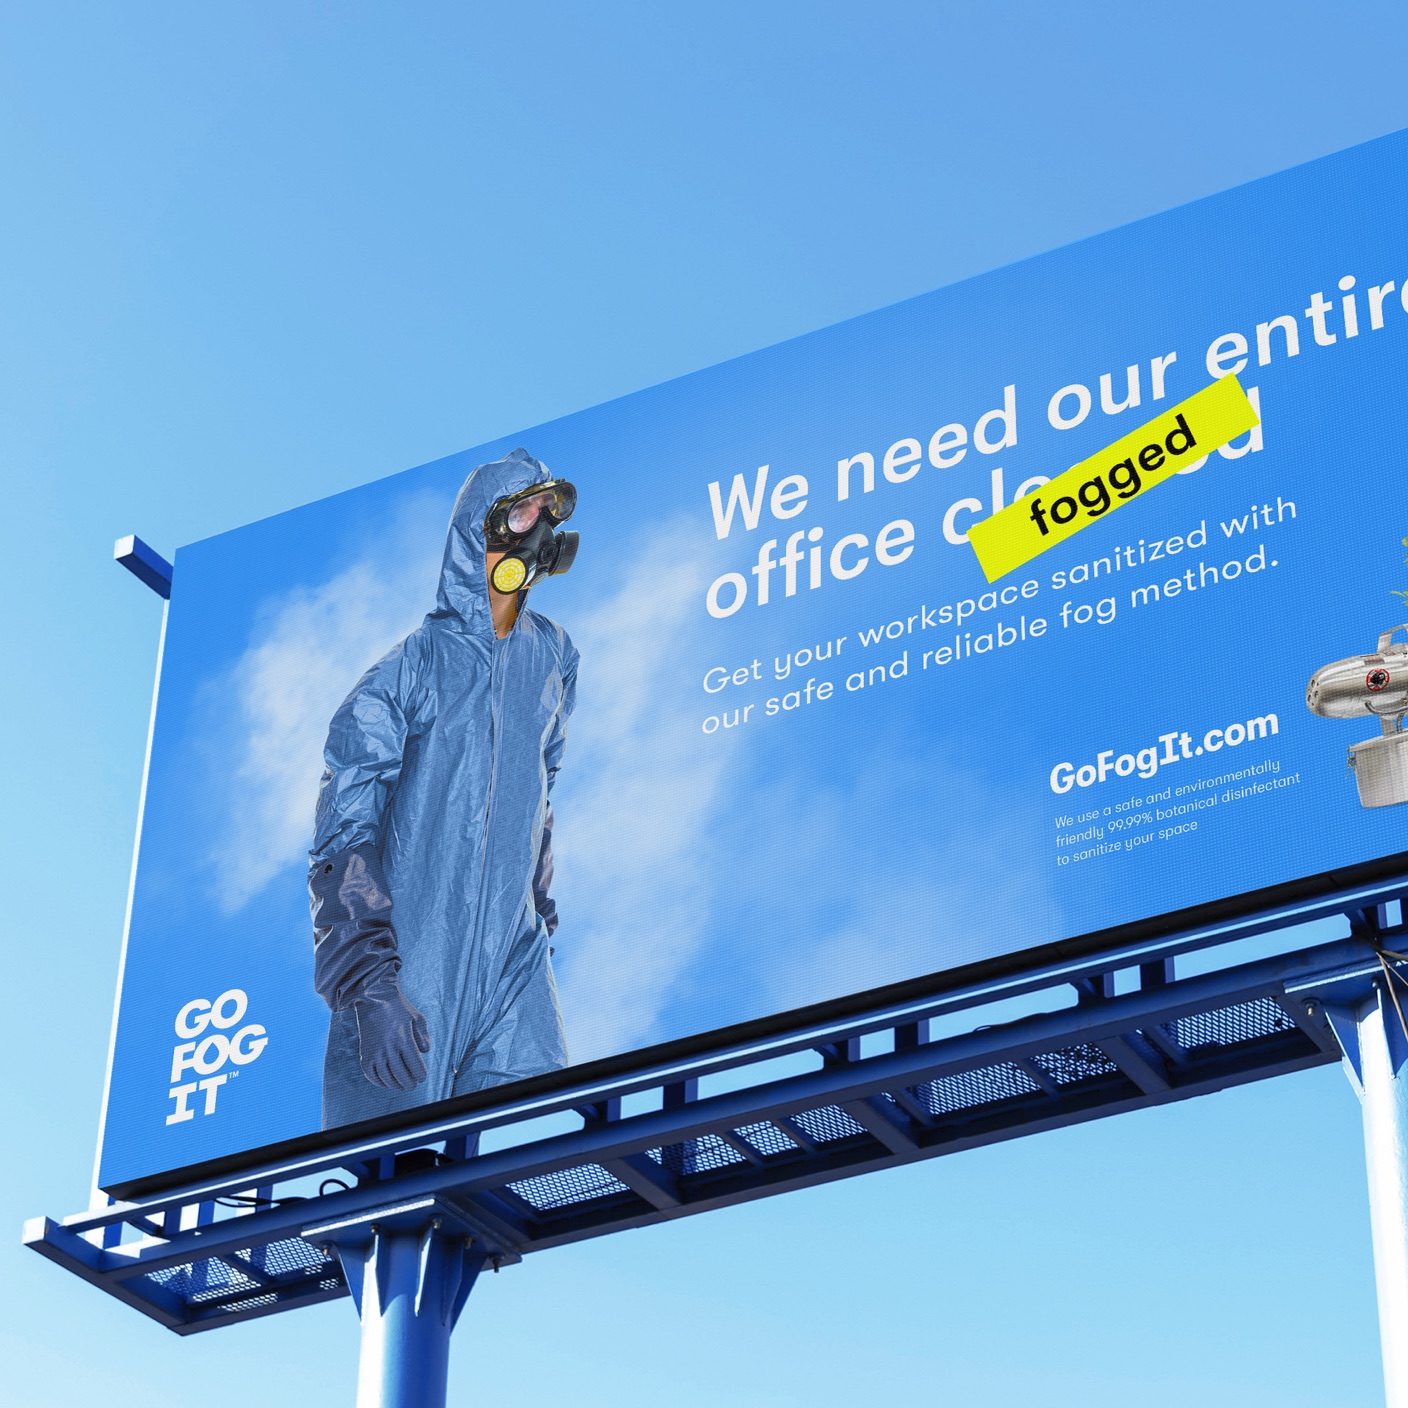 Go Fog It Billboard with a blue sky background, that has a person in a hazmat suit